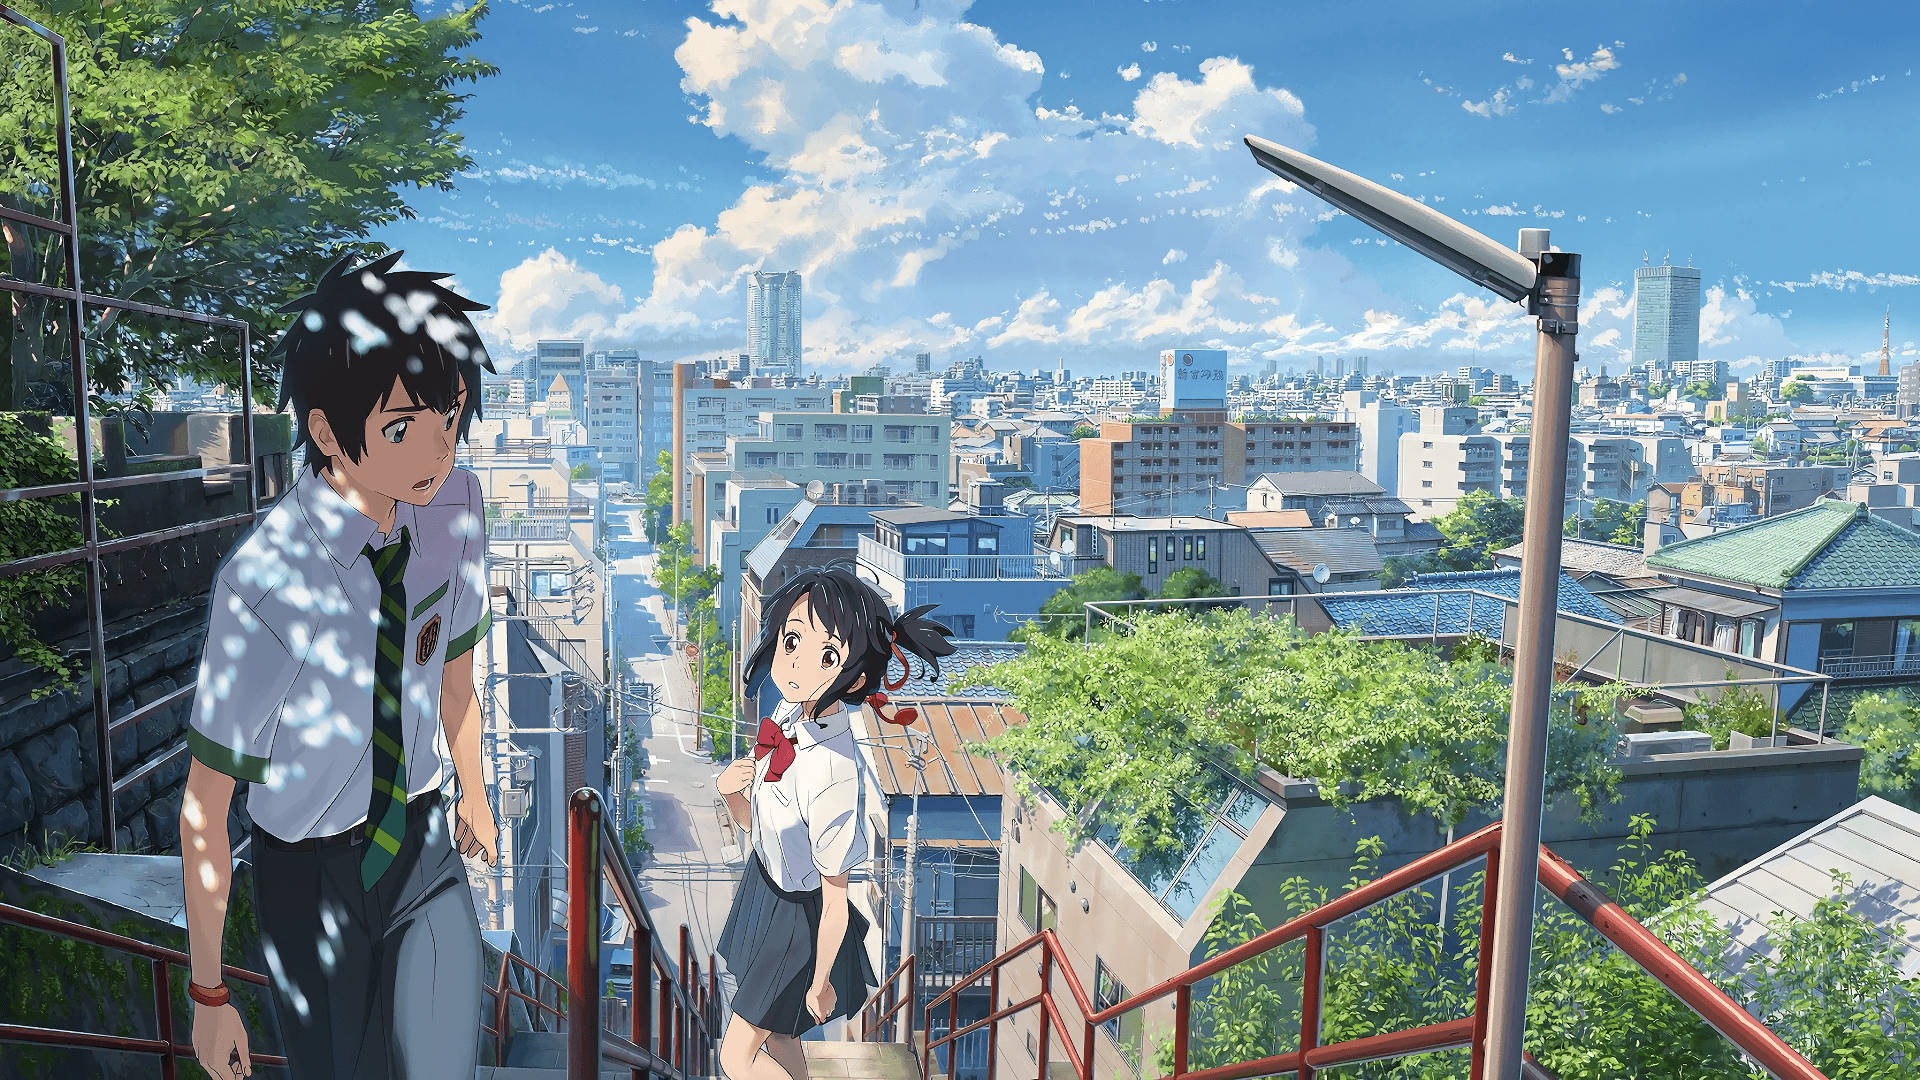 Your Name 1920X1080 Wallpaper and Background Image